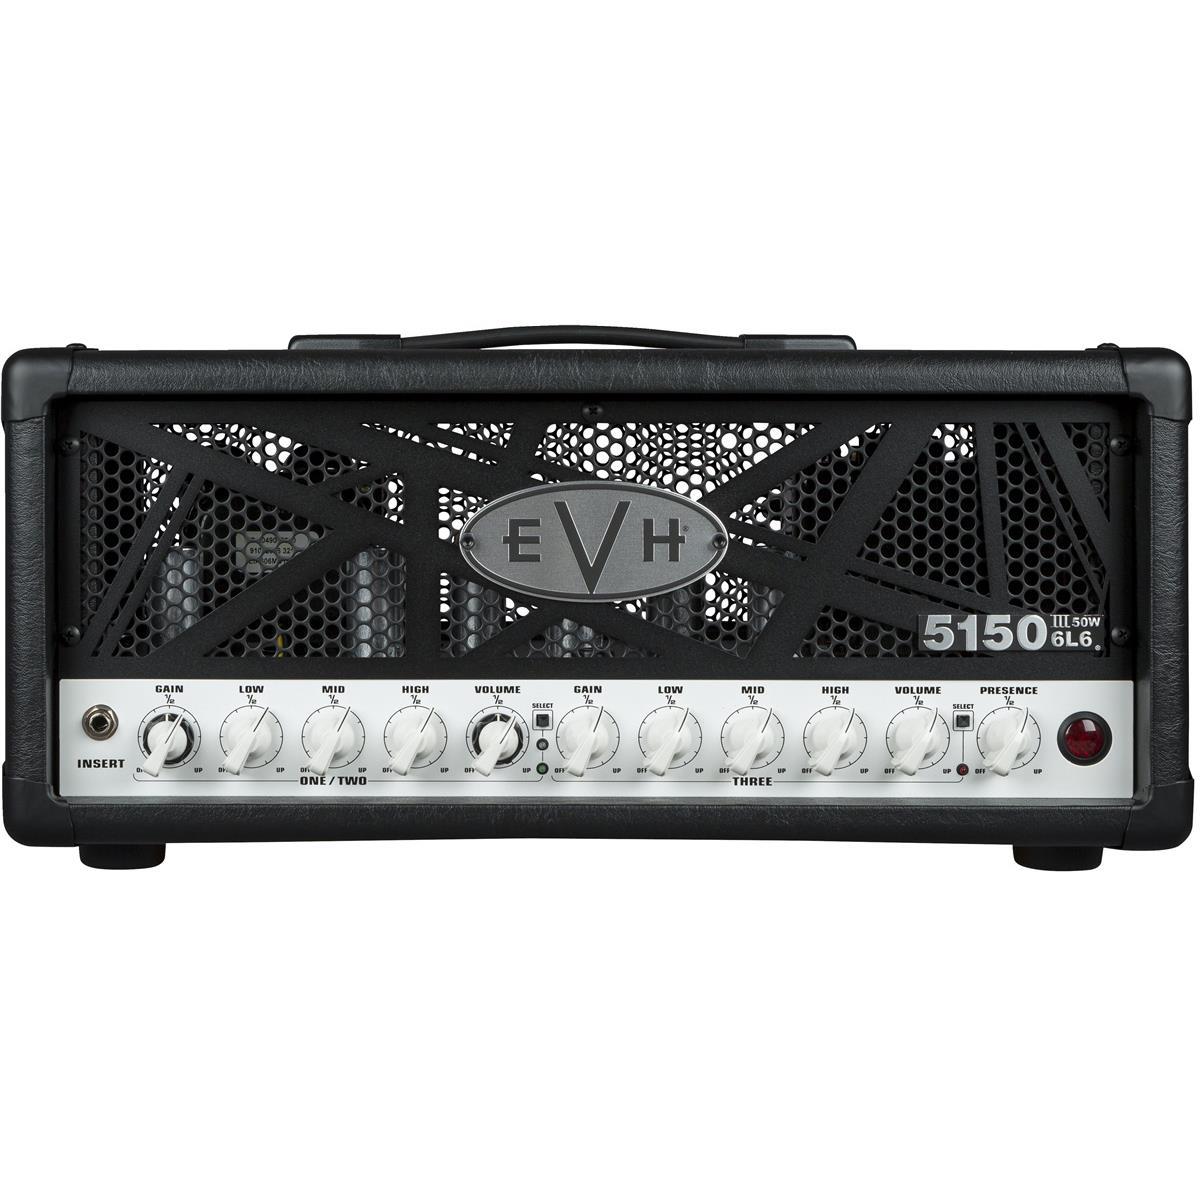 EVH 5150III 50-Watt Amplifier with 6L6 Power Tube, 120V, Black With its smaller size and portability, the EVH 5150III 50W 6L6 Head is the perfect amp for players who want arena volume and performance in a compact package. Three channels of road-tested sound work for any playing style - crisp cleans, raw crunch or searing leads, while newly added independent dual-concentric controls allows for gain and volume level matching. This 2.0 version of our popular 50-watt head delivers a full-spectrum of tone - channel one powers crystal-clear clean tone, channel two ranges from chunky overdrive to tight distortion and channel three oozes with liquid gain. Channels one and two each have dual concentric gain/volume controls, with shared EQ (low, mid, high). Channel three has its own gain, volume and EQ (low, mid, high) controls. All three channels also have global presence and global resonance controls. This amp head also includes selectable impedance (4, 8 or 16 Ohms), dual parallel speaker output jacks, effects loop, headphone jack, line out and a four-button footswitch with 1/4" input jack and MIDI input. Loaded with pure EVH sound and power, the EVH 5150III 50W 6L6 Head is wrapped in Black or Ivory textured vinyl and features our instantly recognizable black EVH-striped steel grille. A high- quality fitted cover is available as an EVH Accessory.